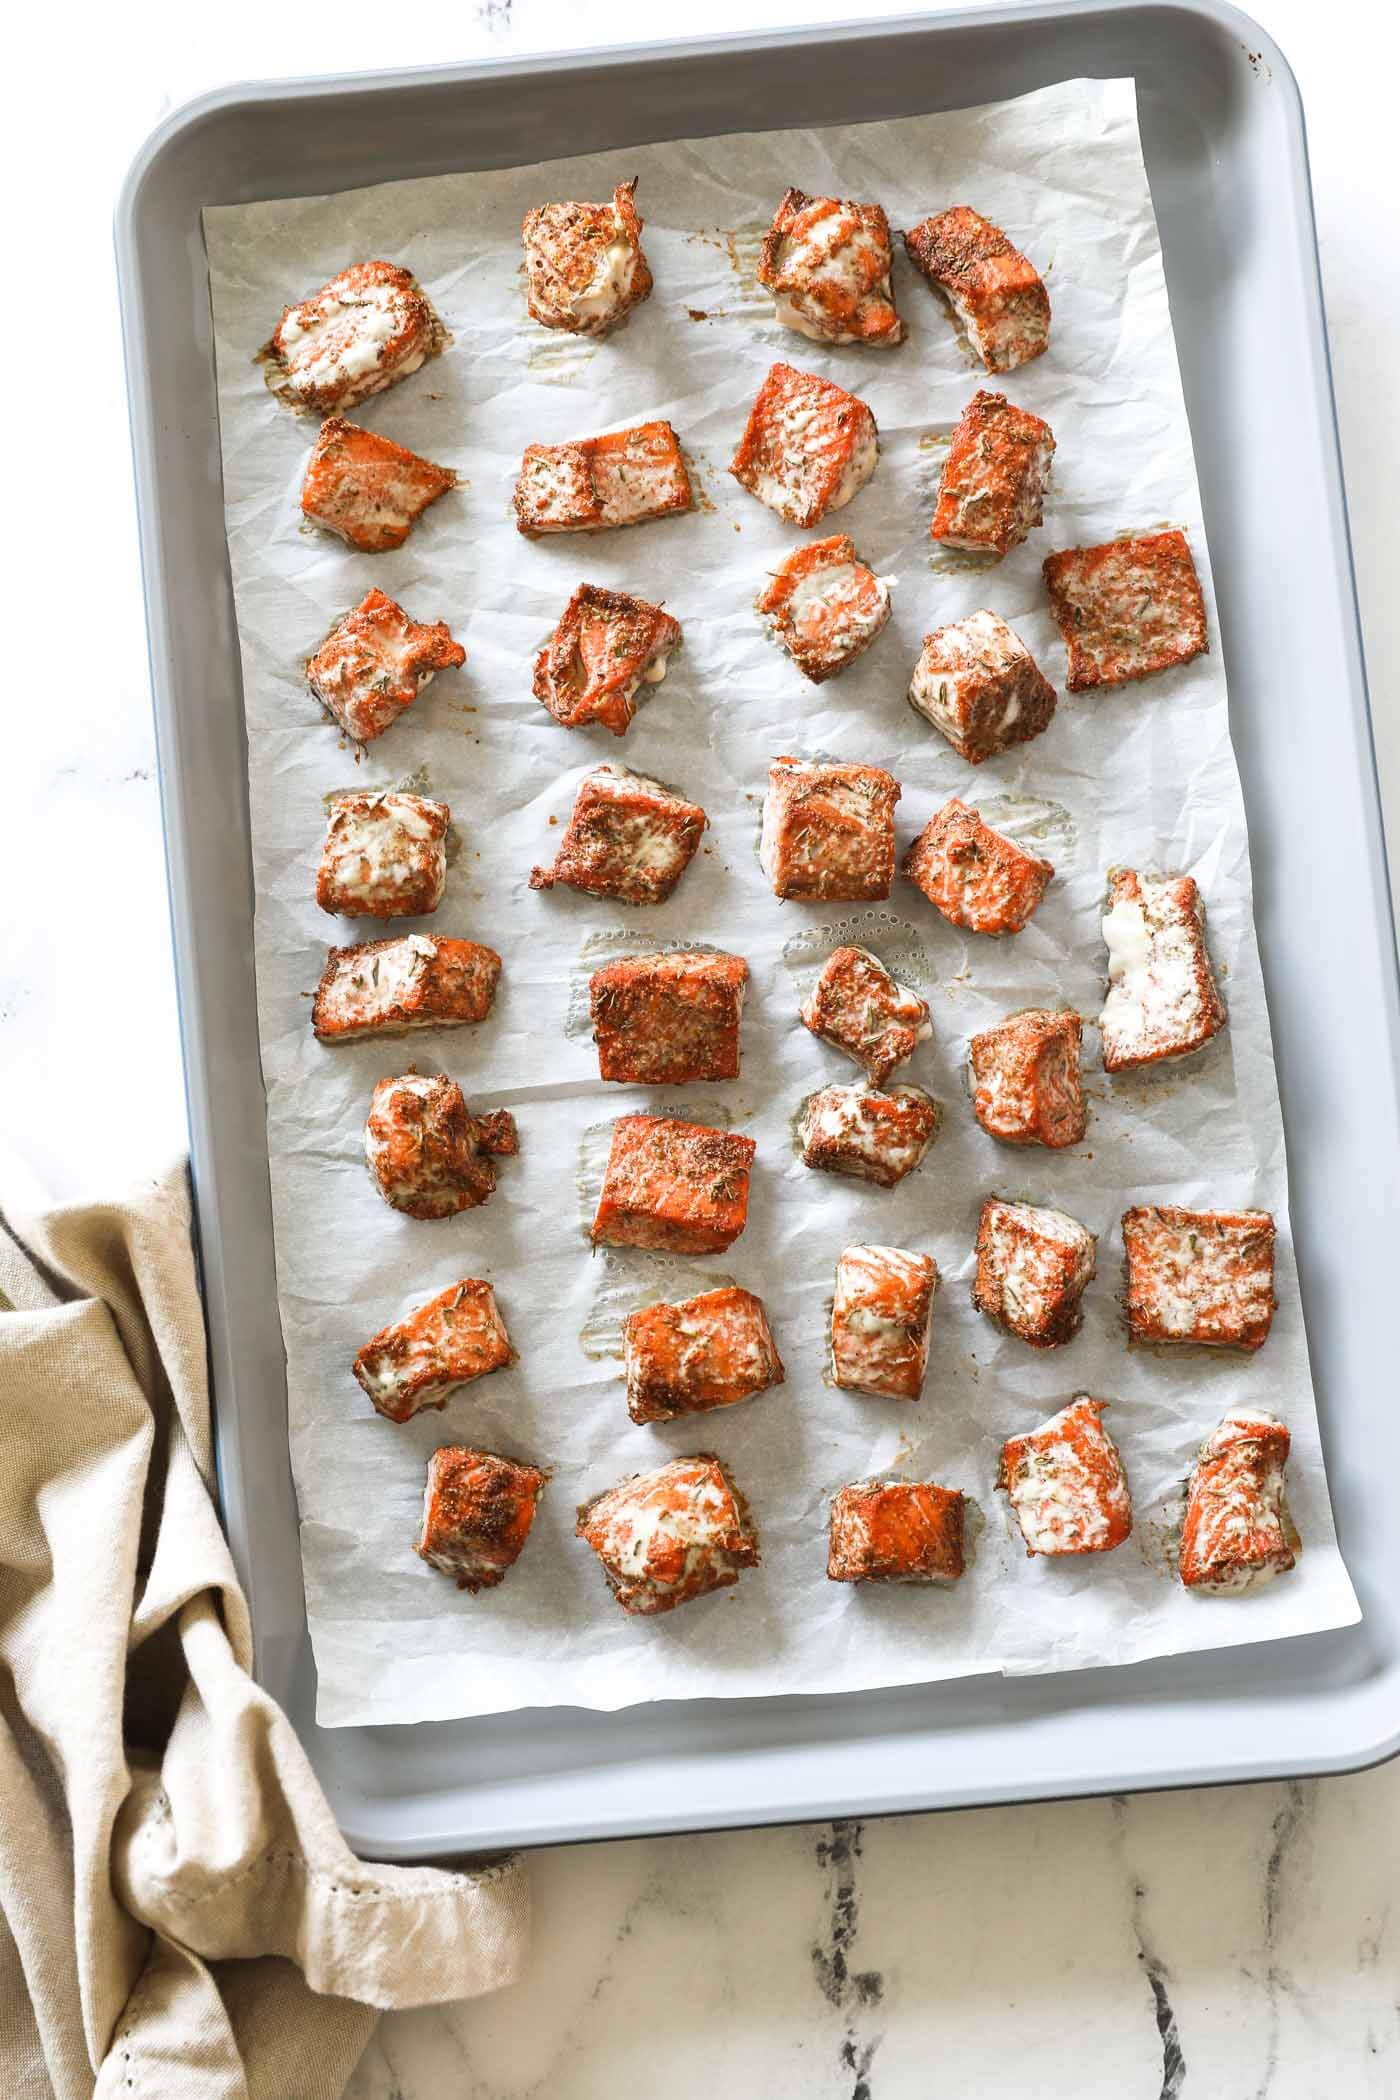 Cooked salmon bites on a baking sheet lined with parchment paper